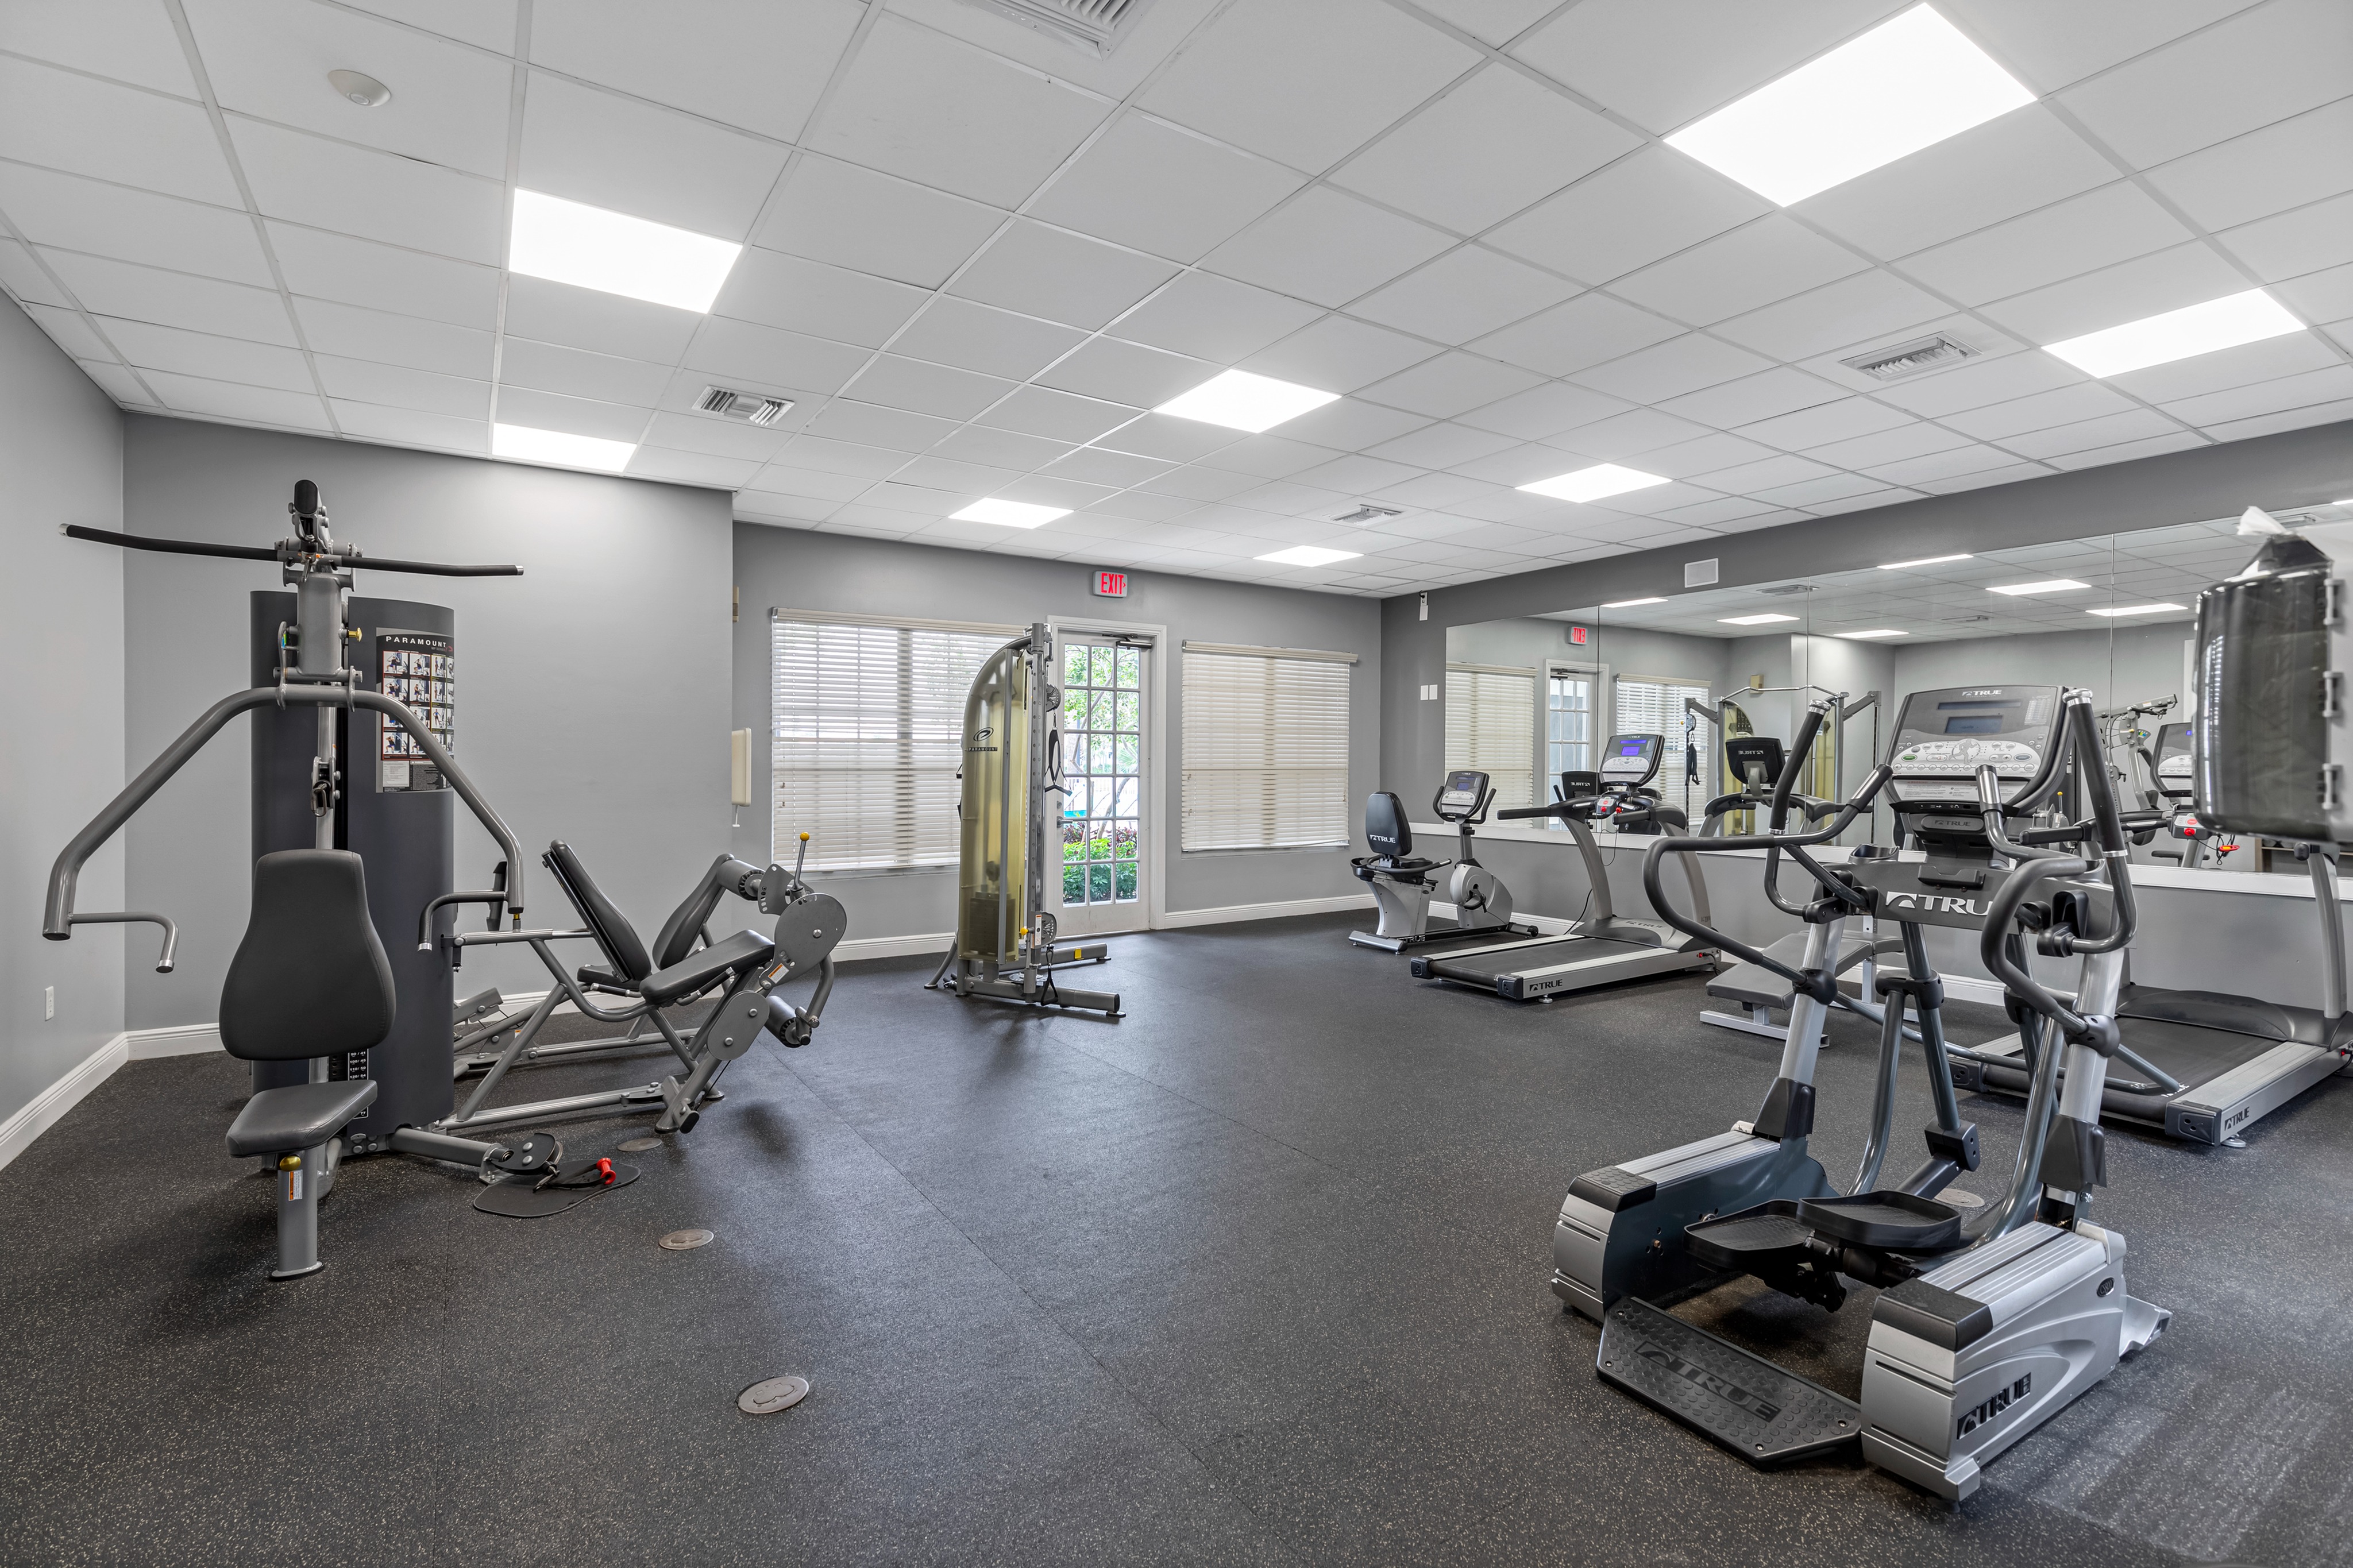 Fitness center with mirrored wall, treadmills, workout benches, and various weight machines